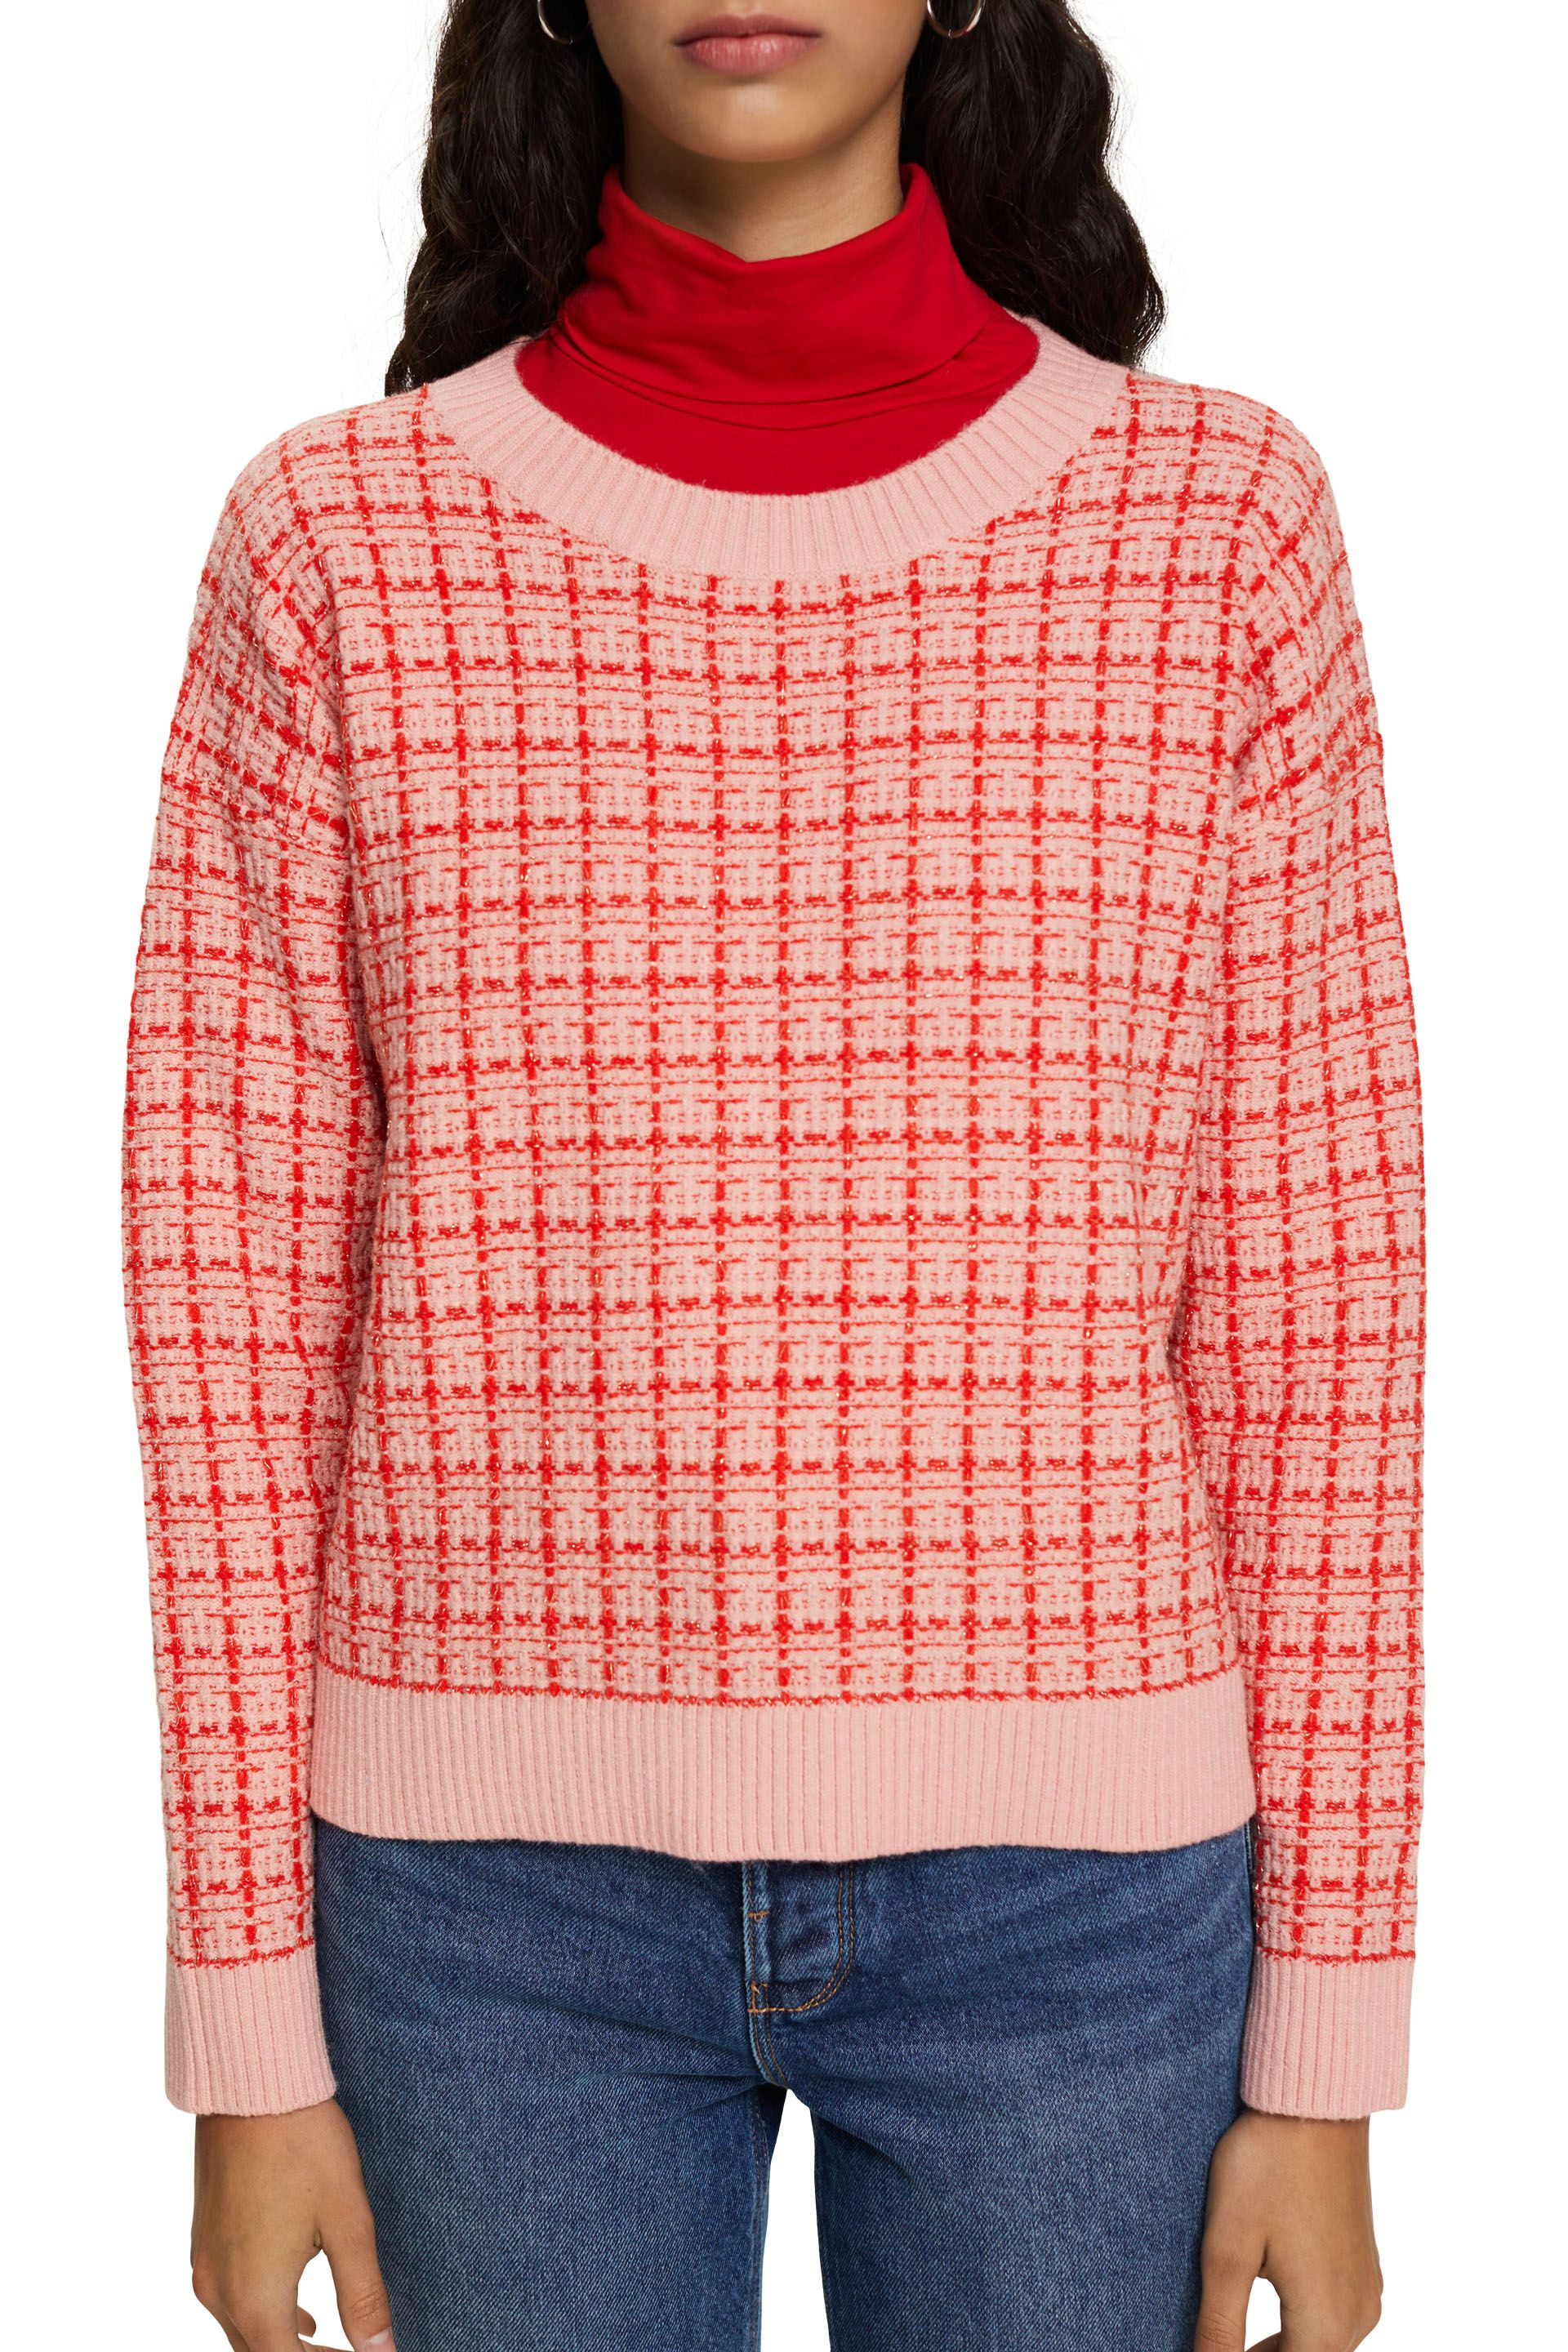 Esprit - Checked pullover, Pink, large image number 1